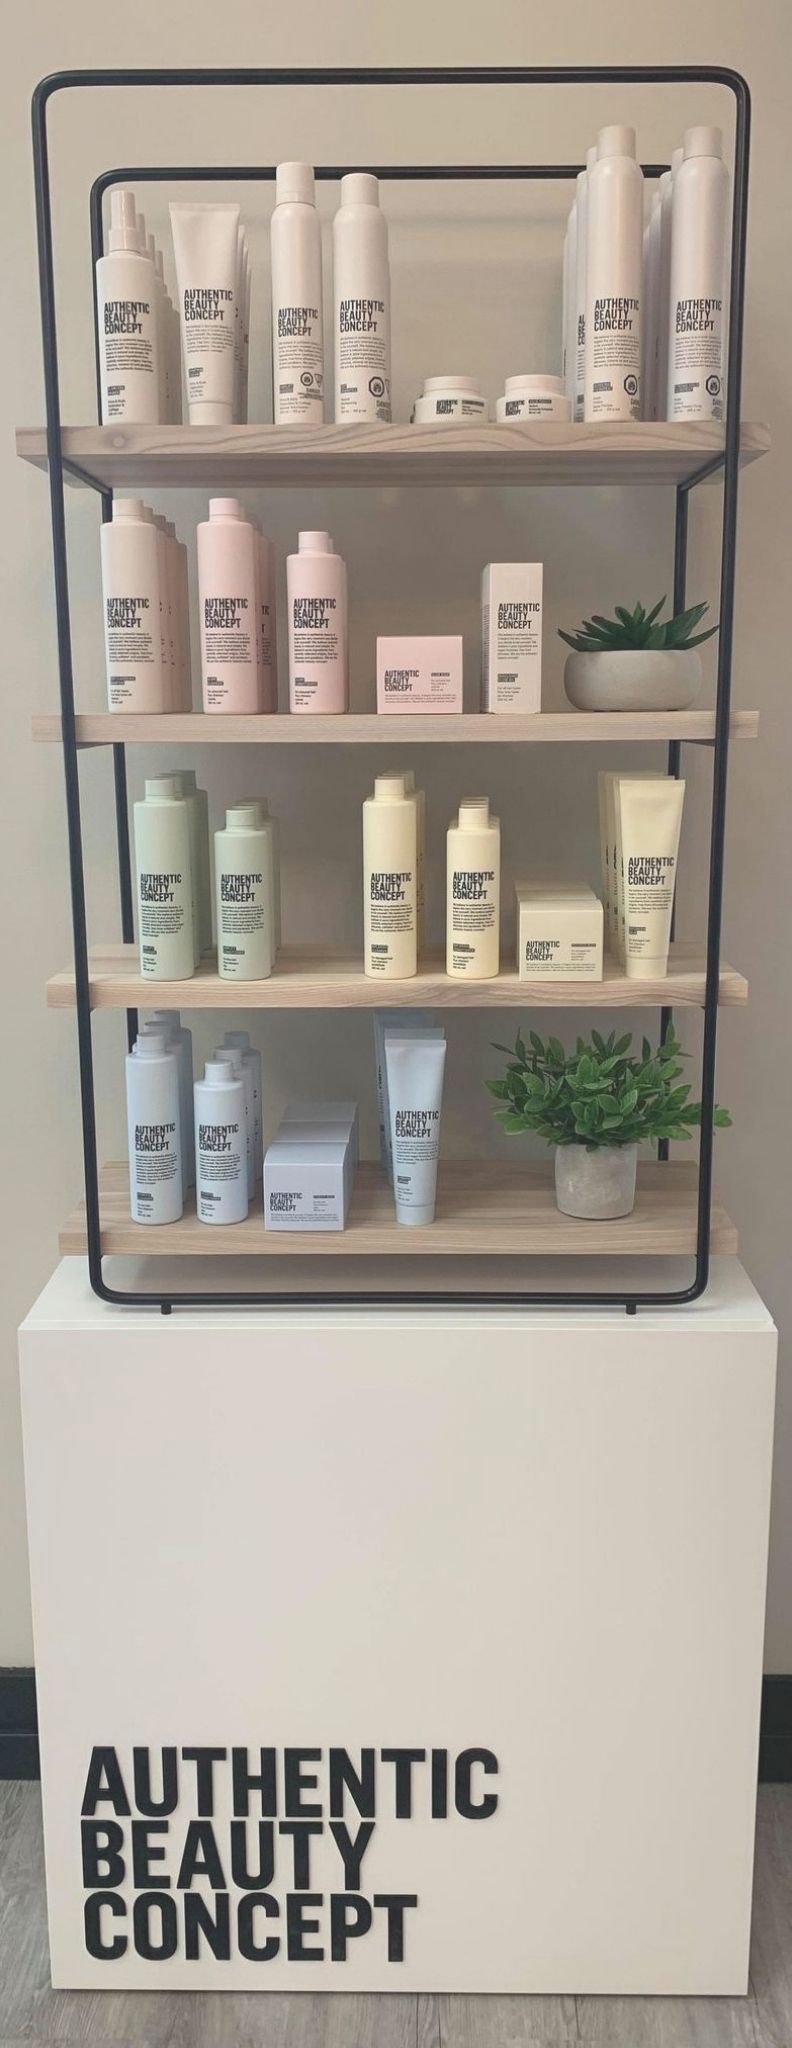 Our Authentic Beauty Concept display